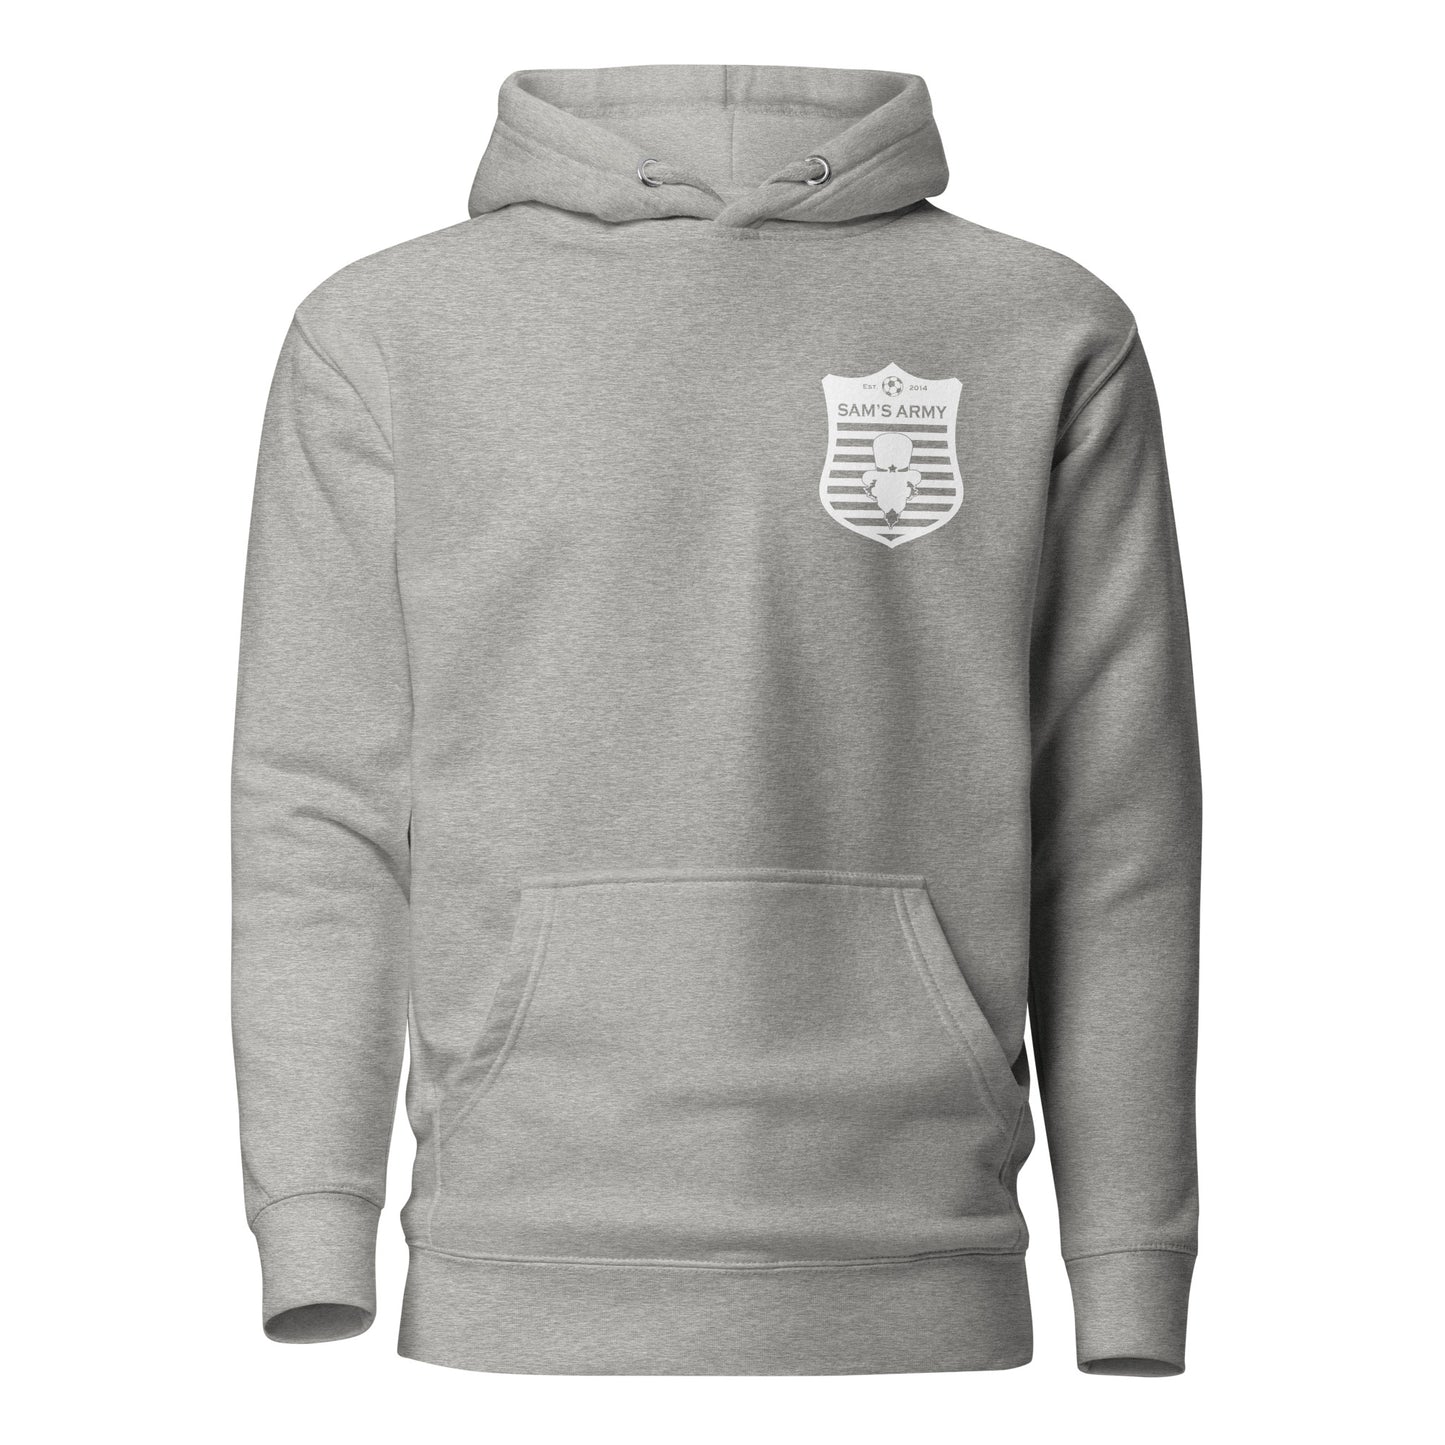 Sam's Army Hoodie - Whiteout